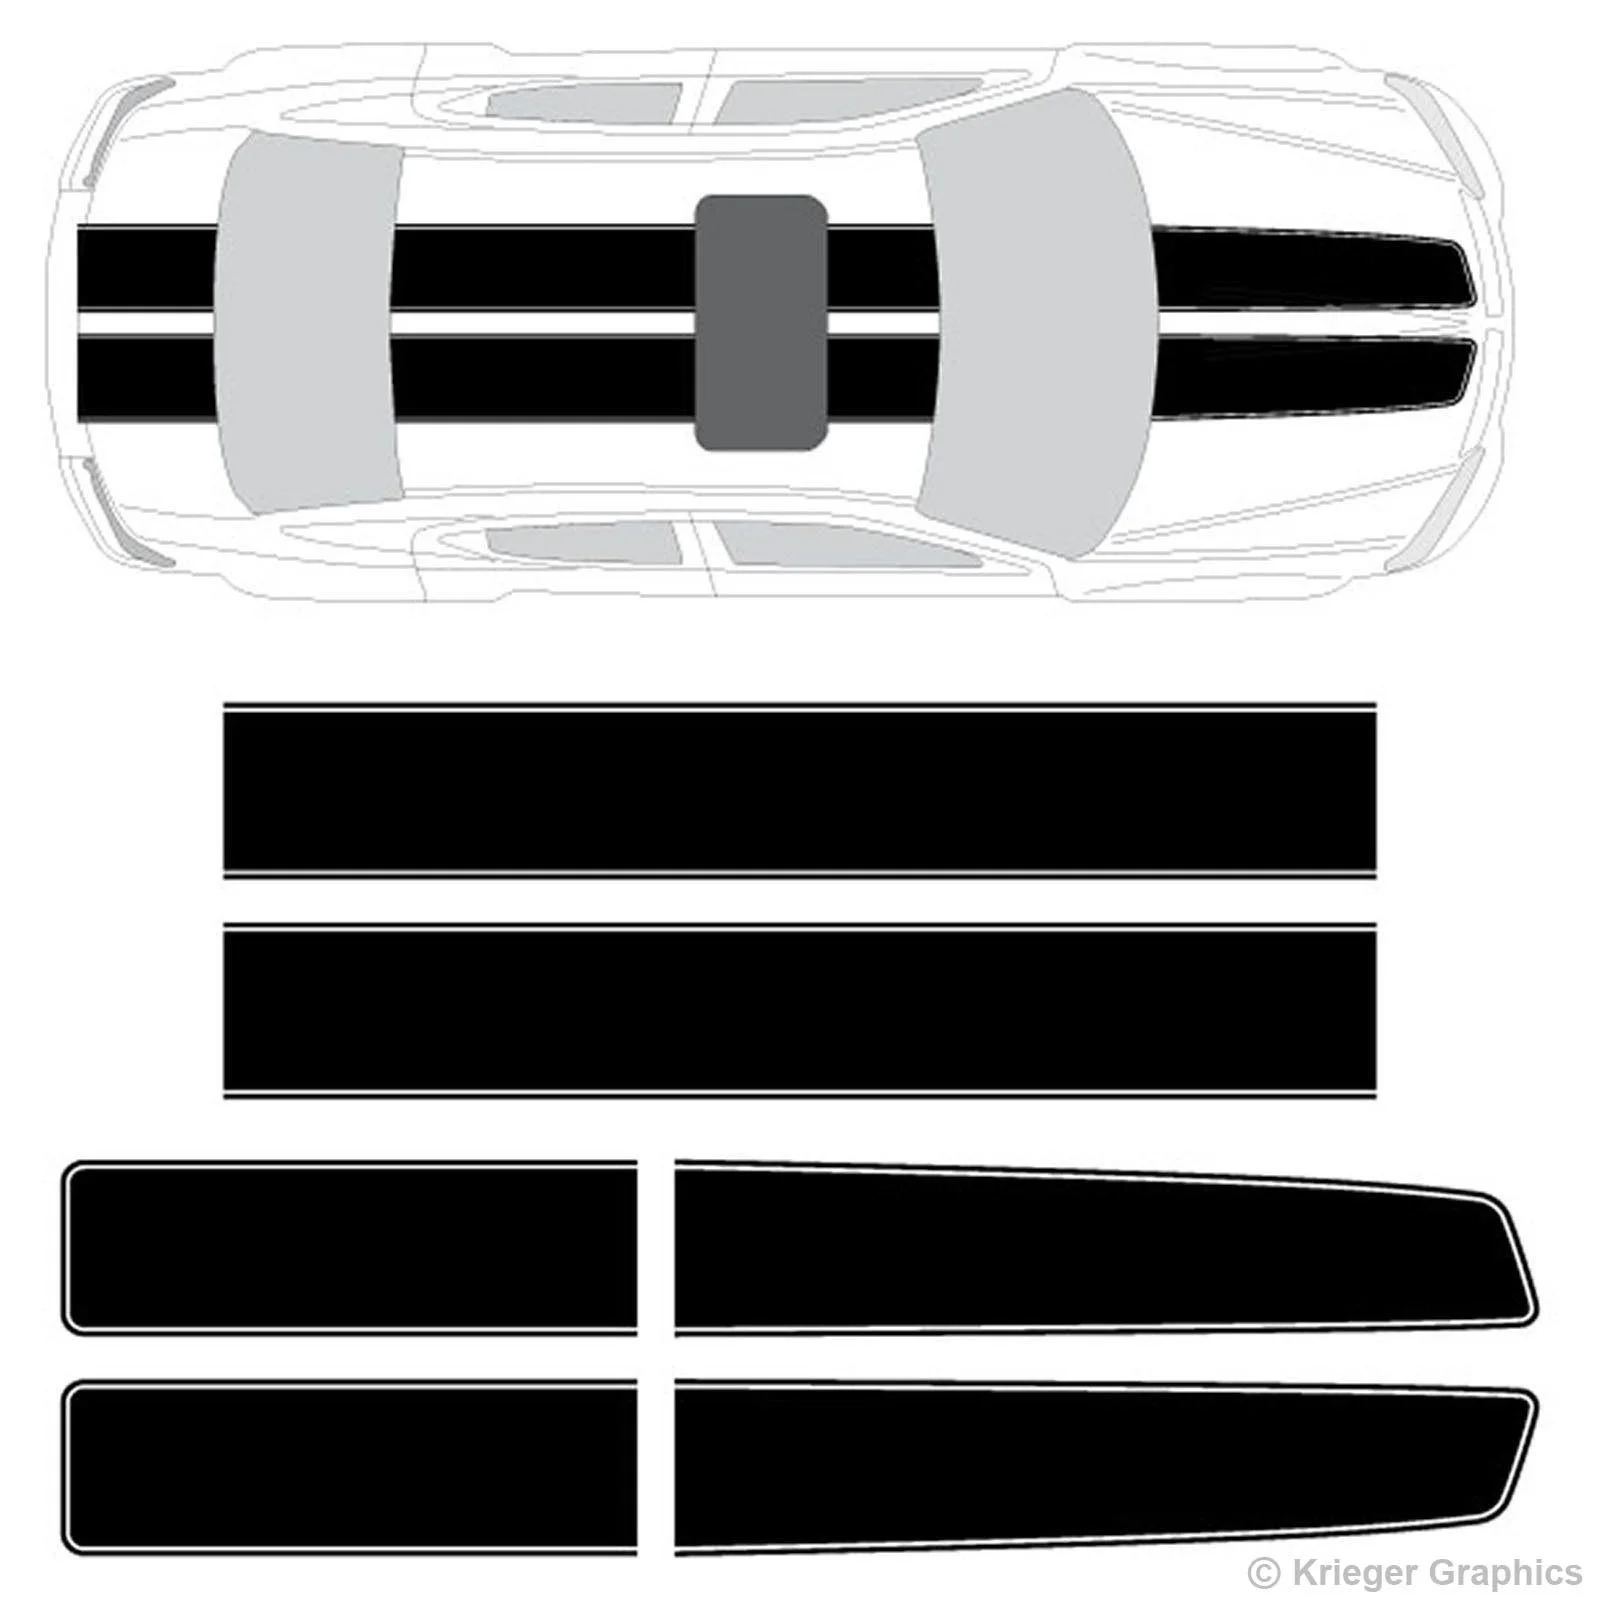 

For 2Pcs/1Pair Dodge Avenger EZ Rally Racing Stripes Vinyl Stripe Decals Graphics Car styling